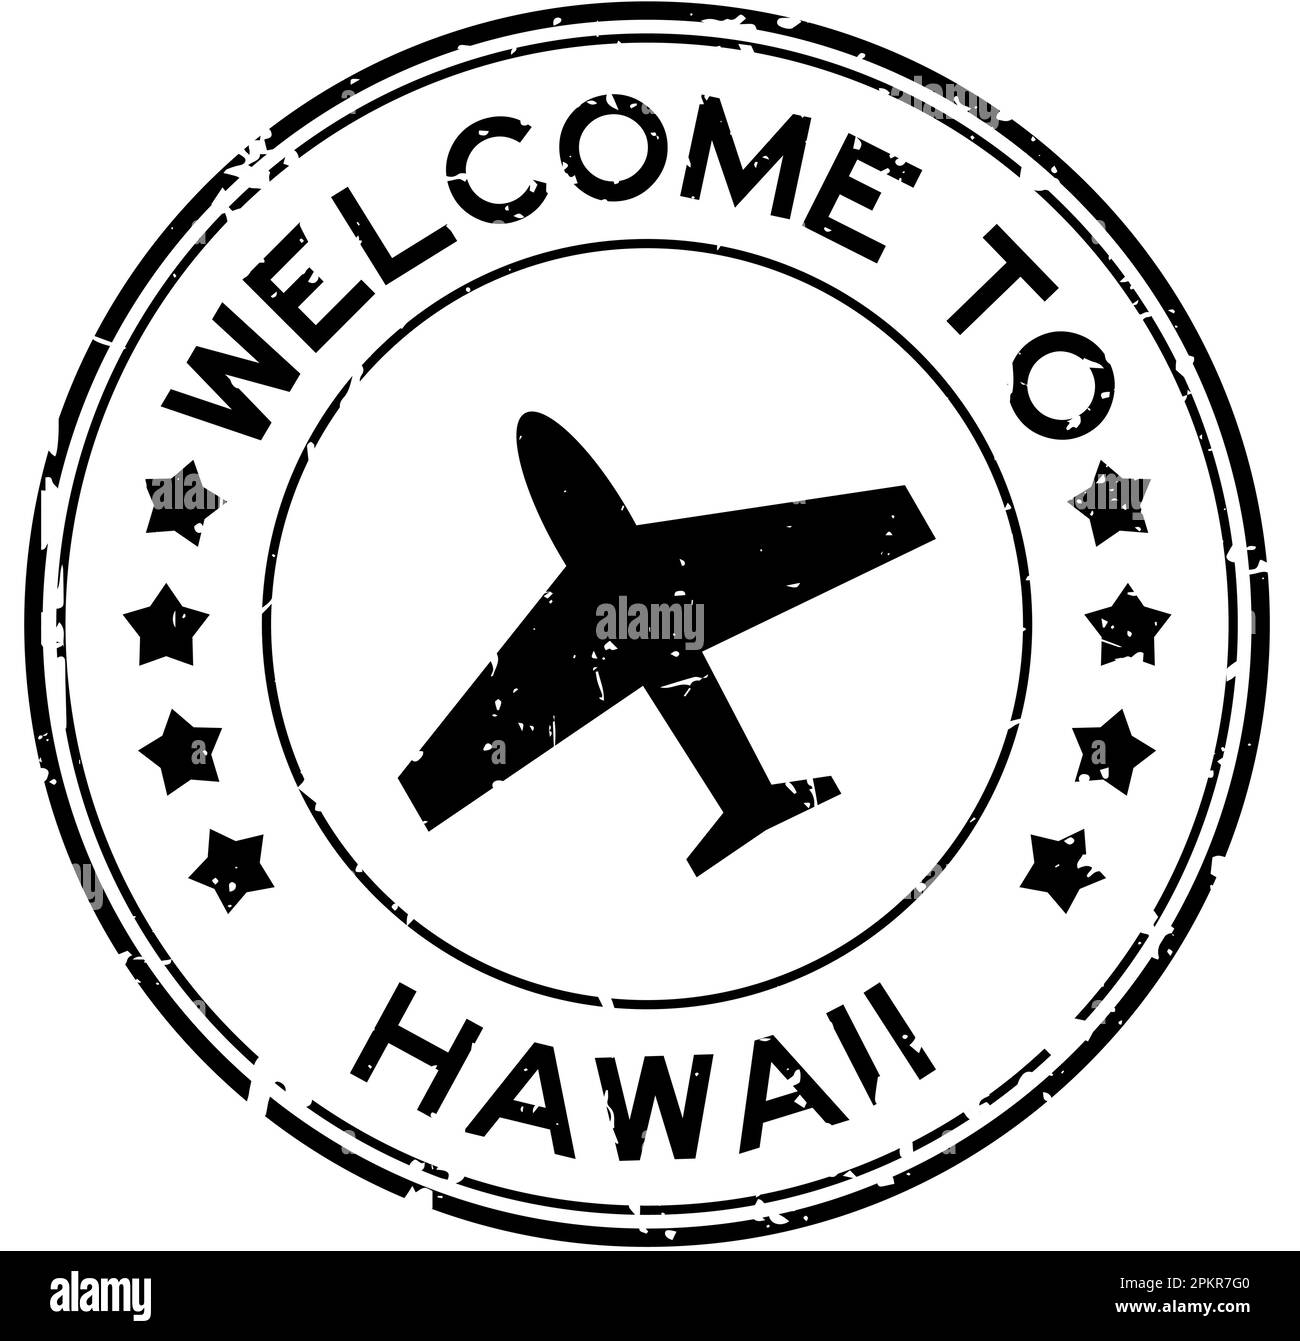 Grunge black welcome to word hawaii with plane icon round rubber seal stamp on white background Stock Vector